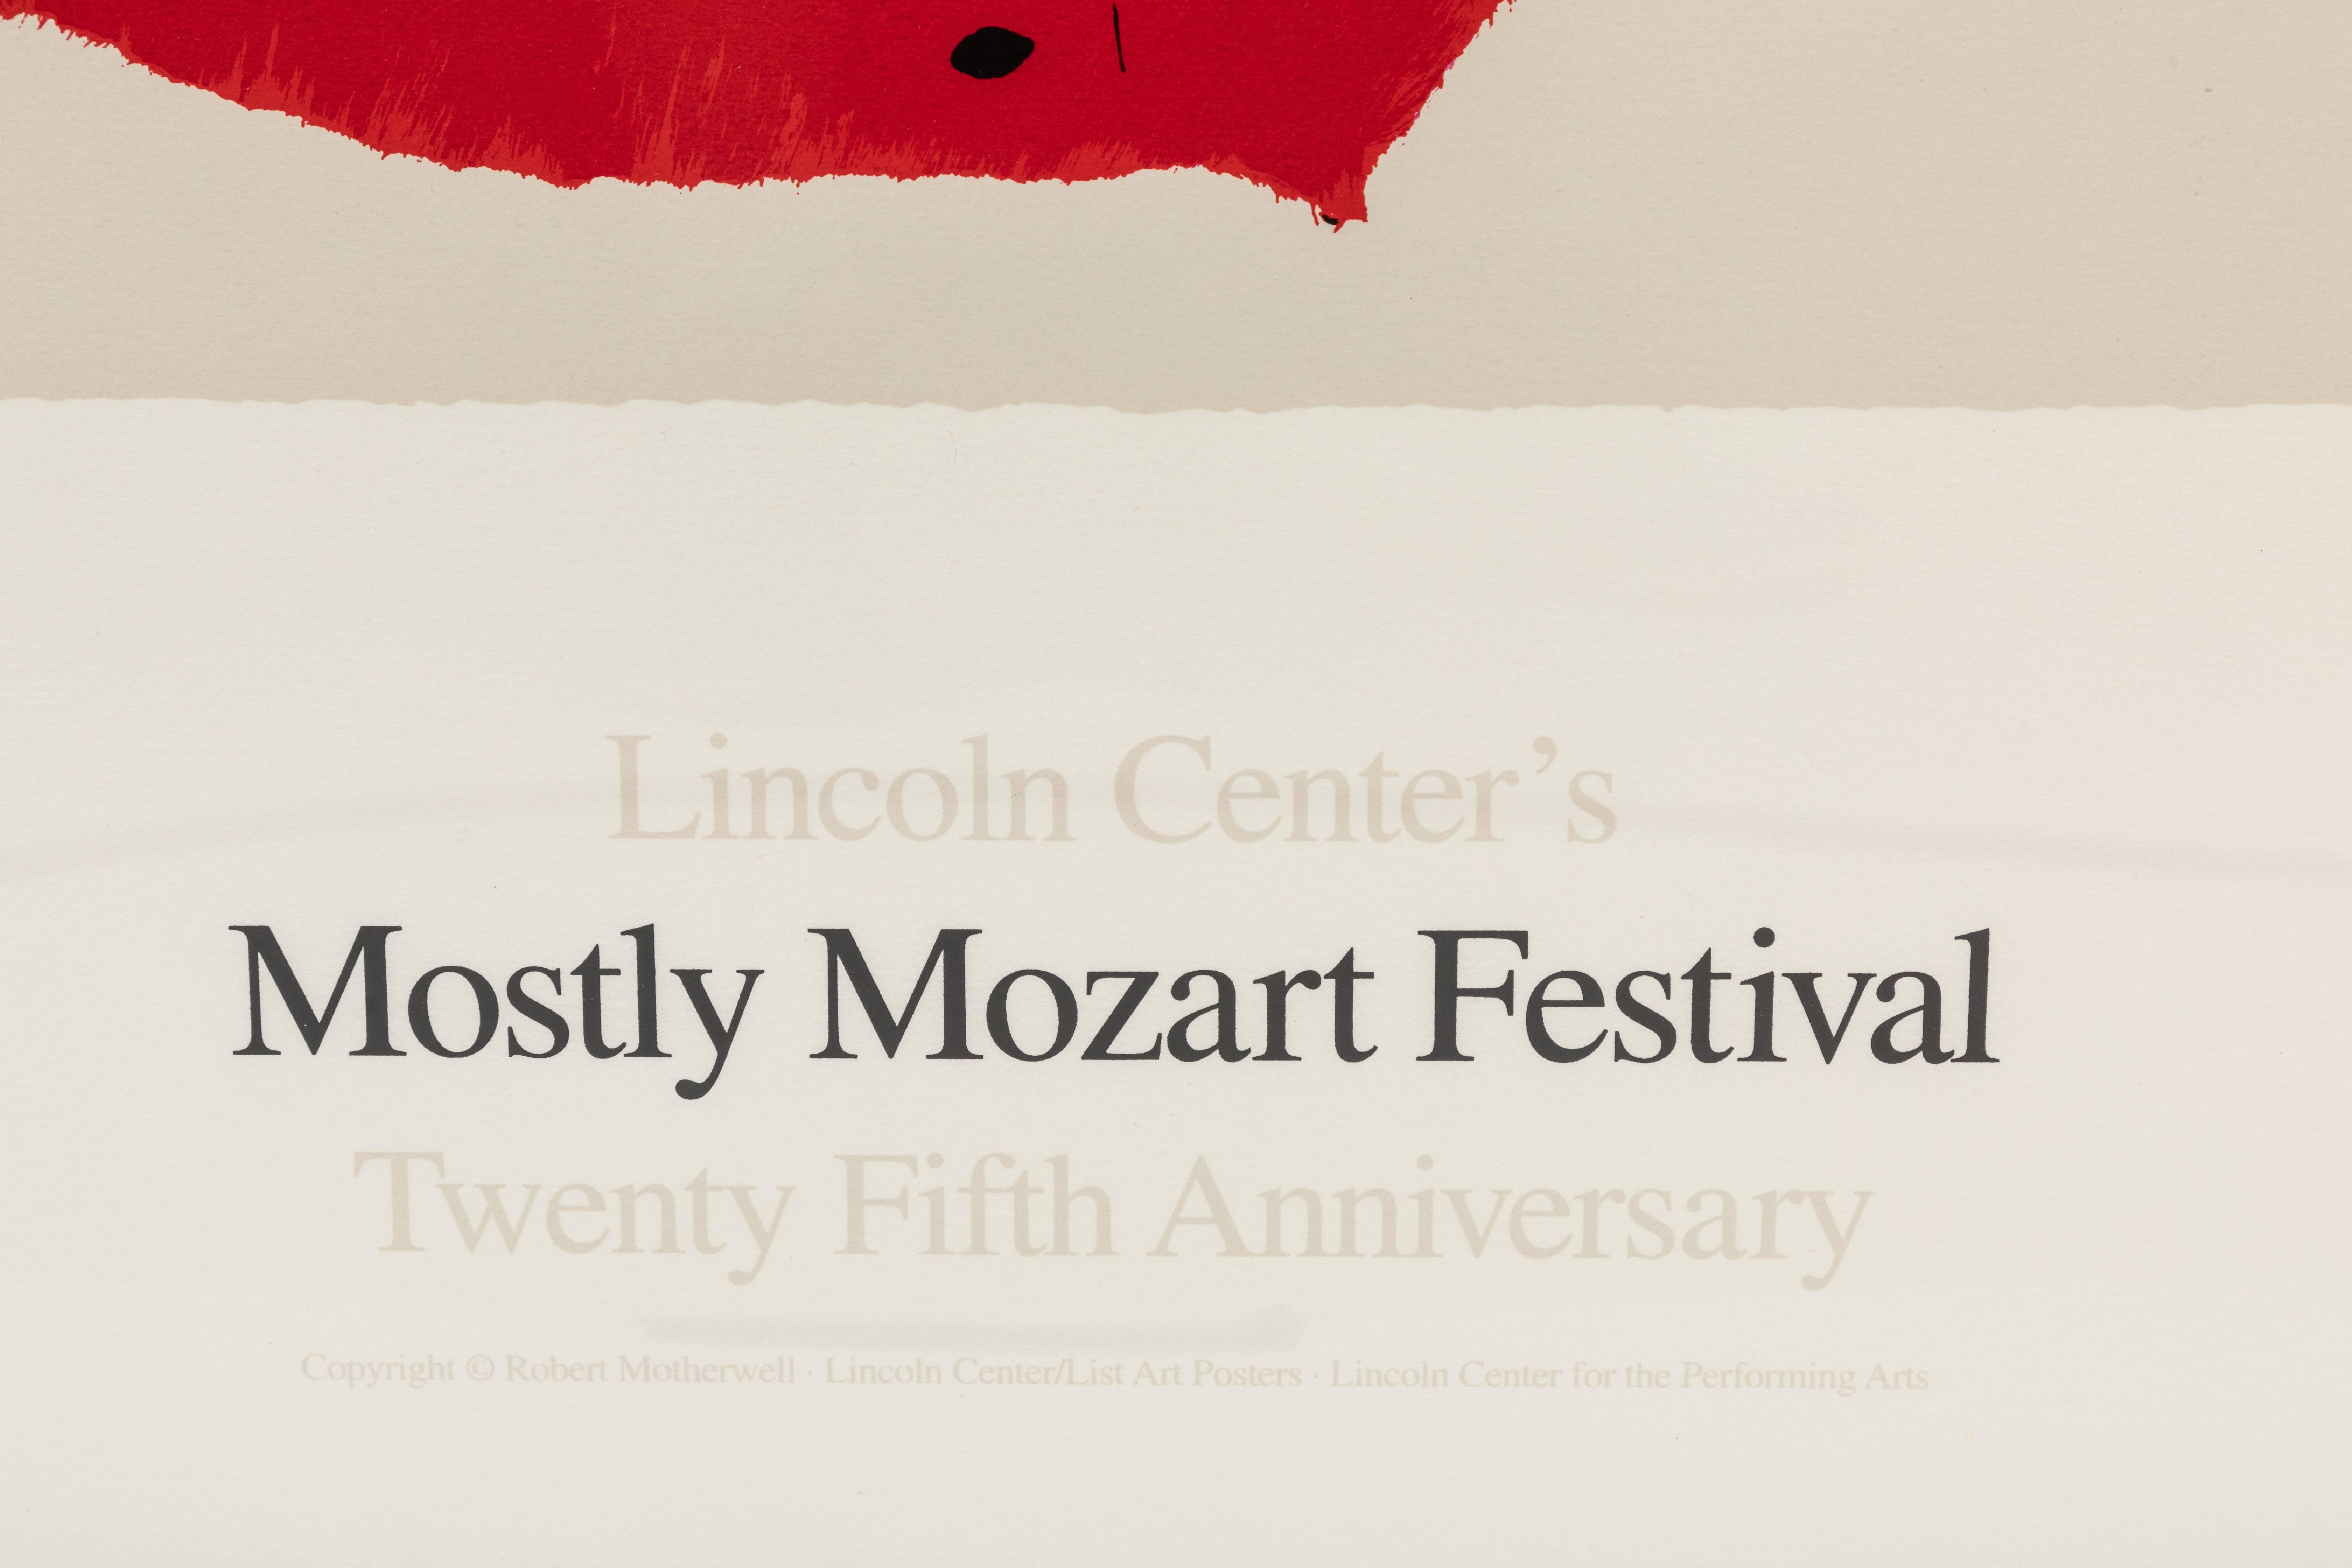 Framed Lincoln Center mostly Mozart 25th anniversary poster designed by the youngest pioneer of the Abstract Expressionist art movement, Robert Motherwell (1915-1991). It was originally intended to be both print and poster, but only an unsigned